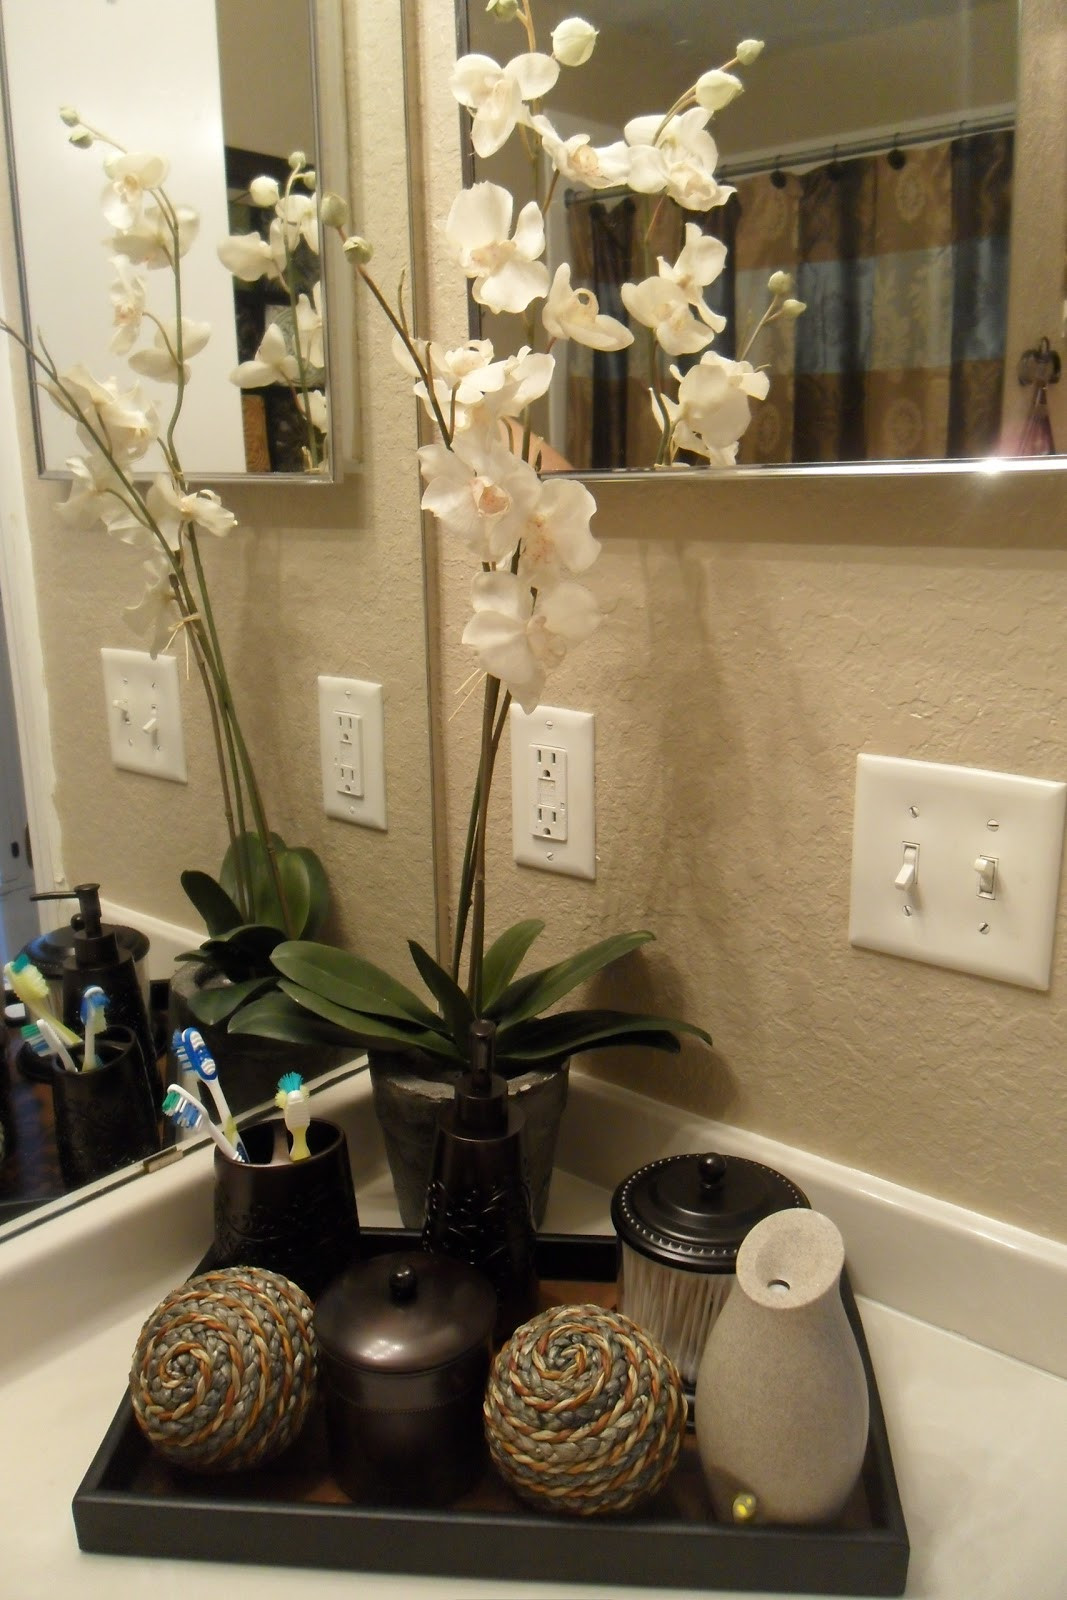 Bathroom Counter Decorating Ideas
 Decorating with e Pink Chic Went Shopping and redone my